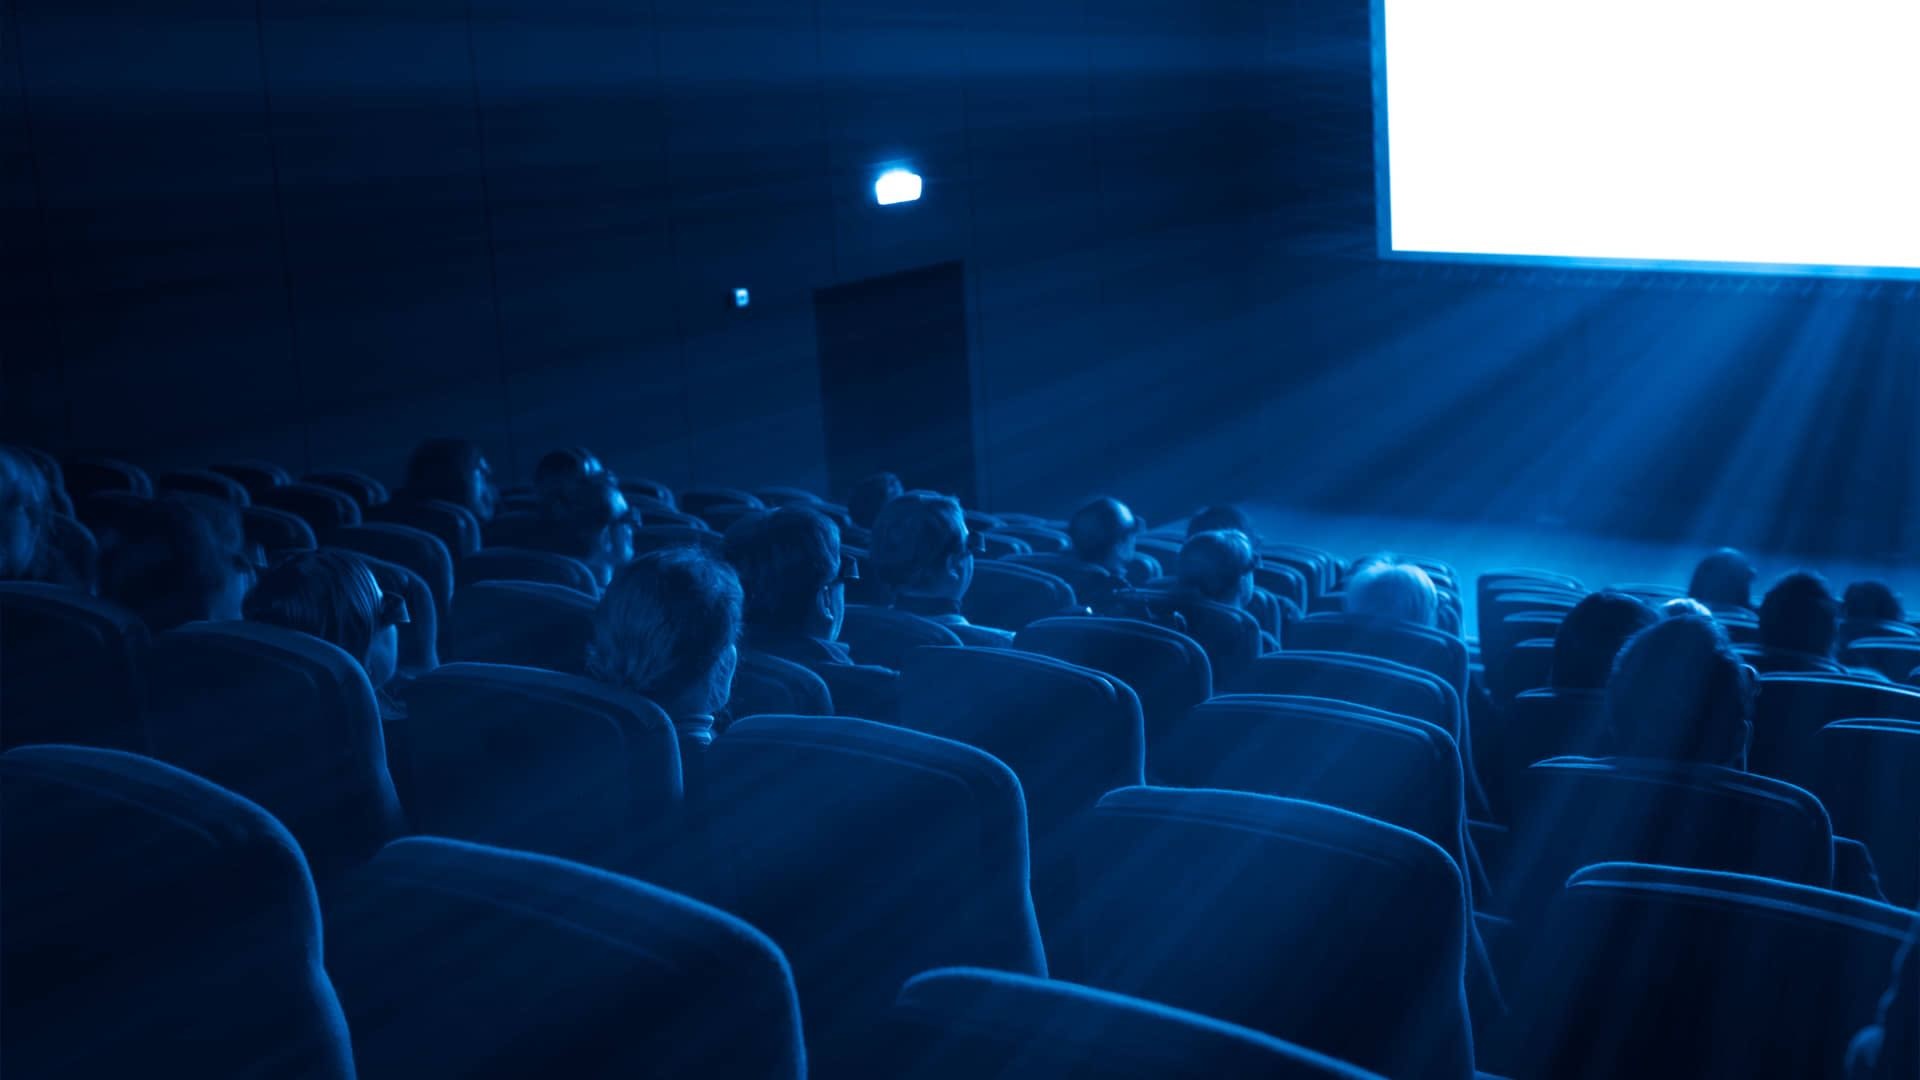 Sizing the cinema: India's theatre-going population in numbers